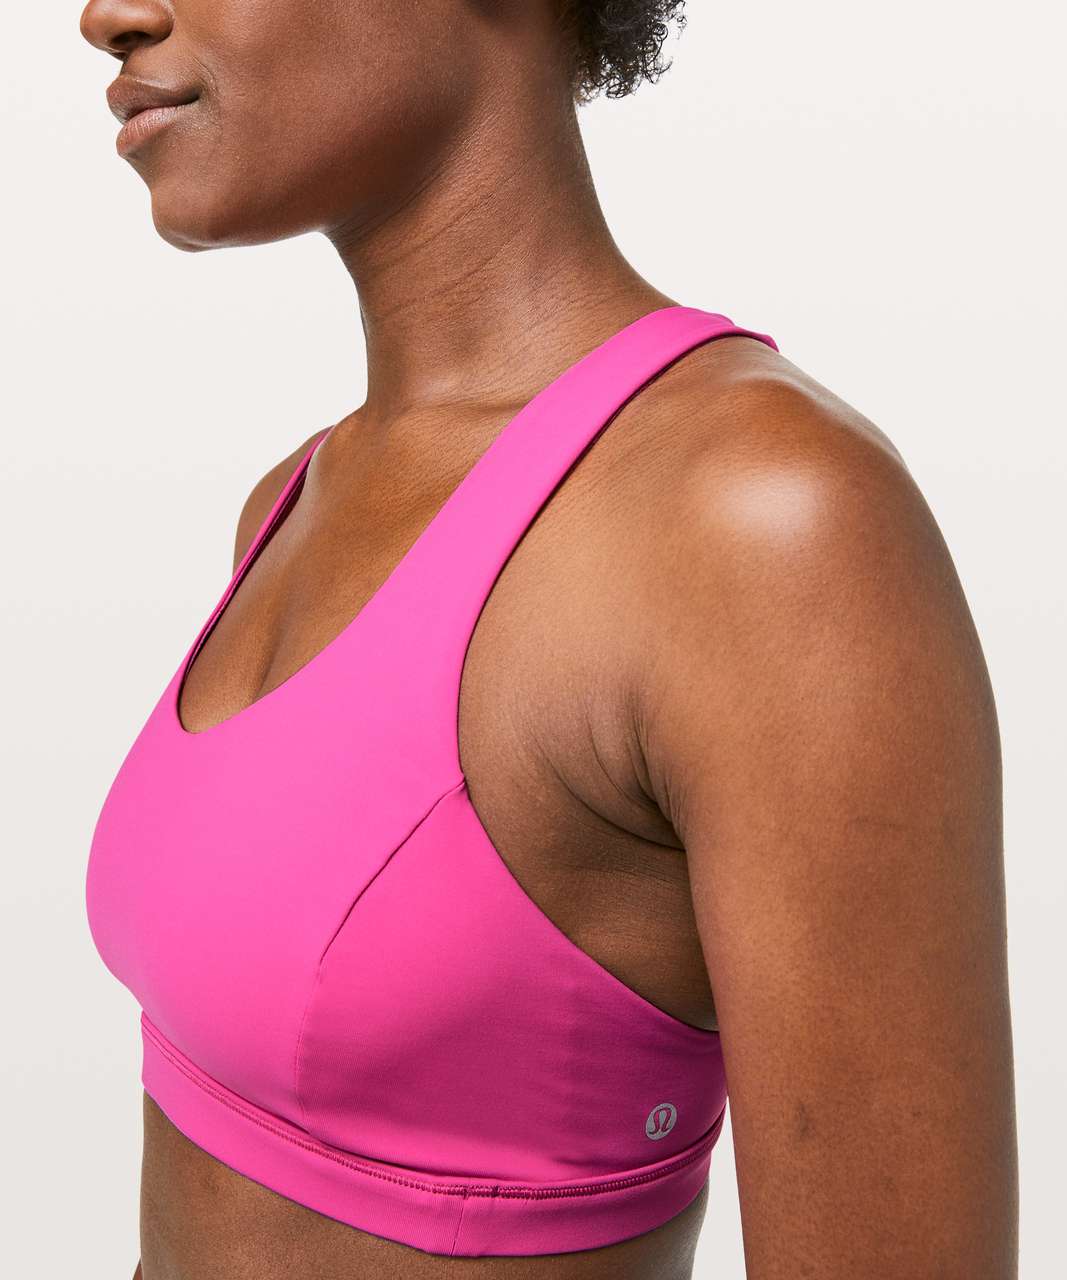 Lululemon Free To Be Serene Bra Pink - $58 (62% Off Retail) - From